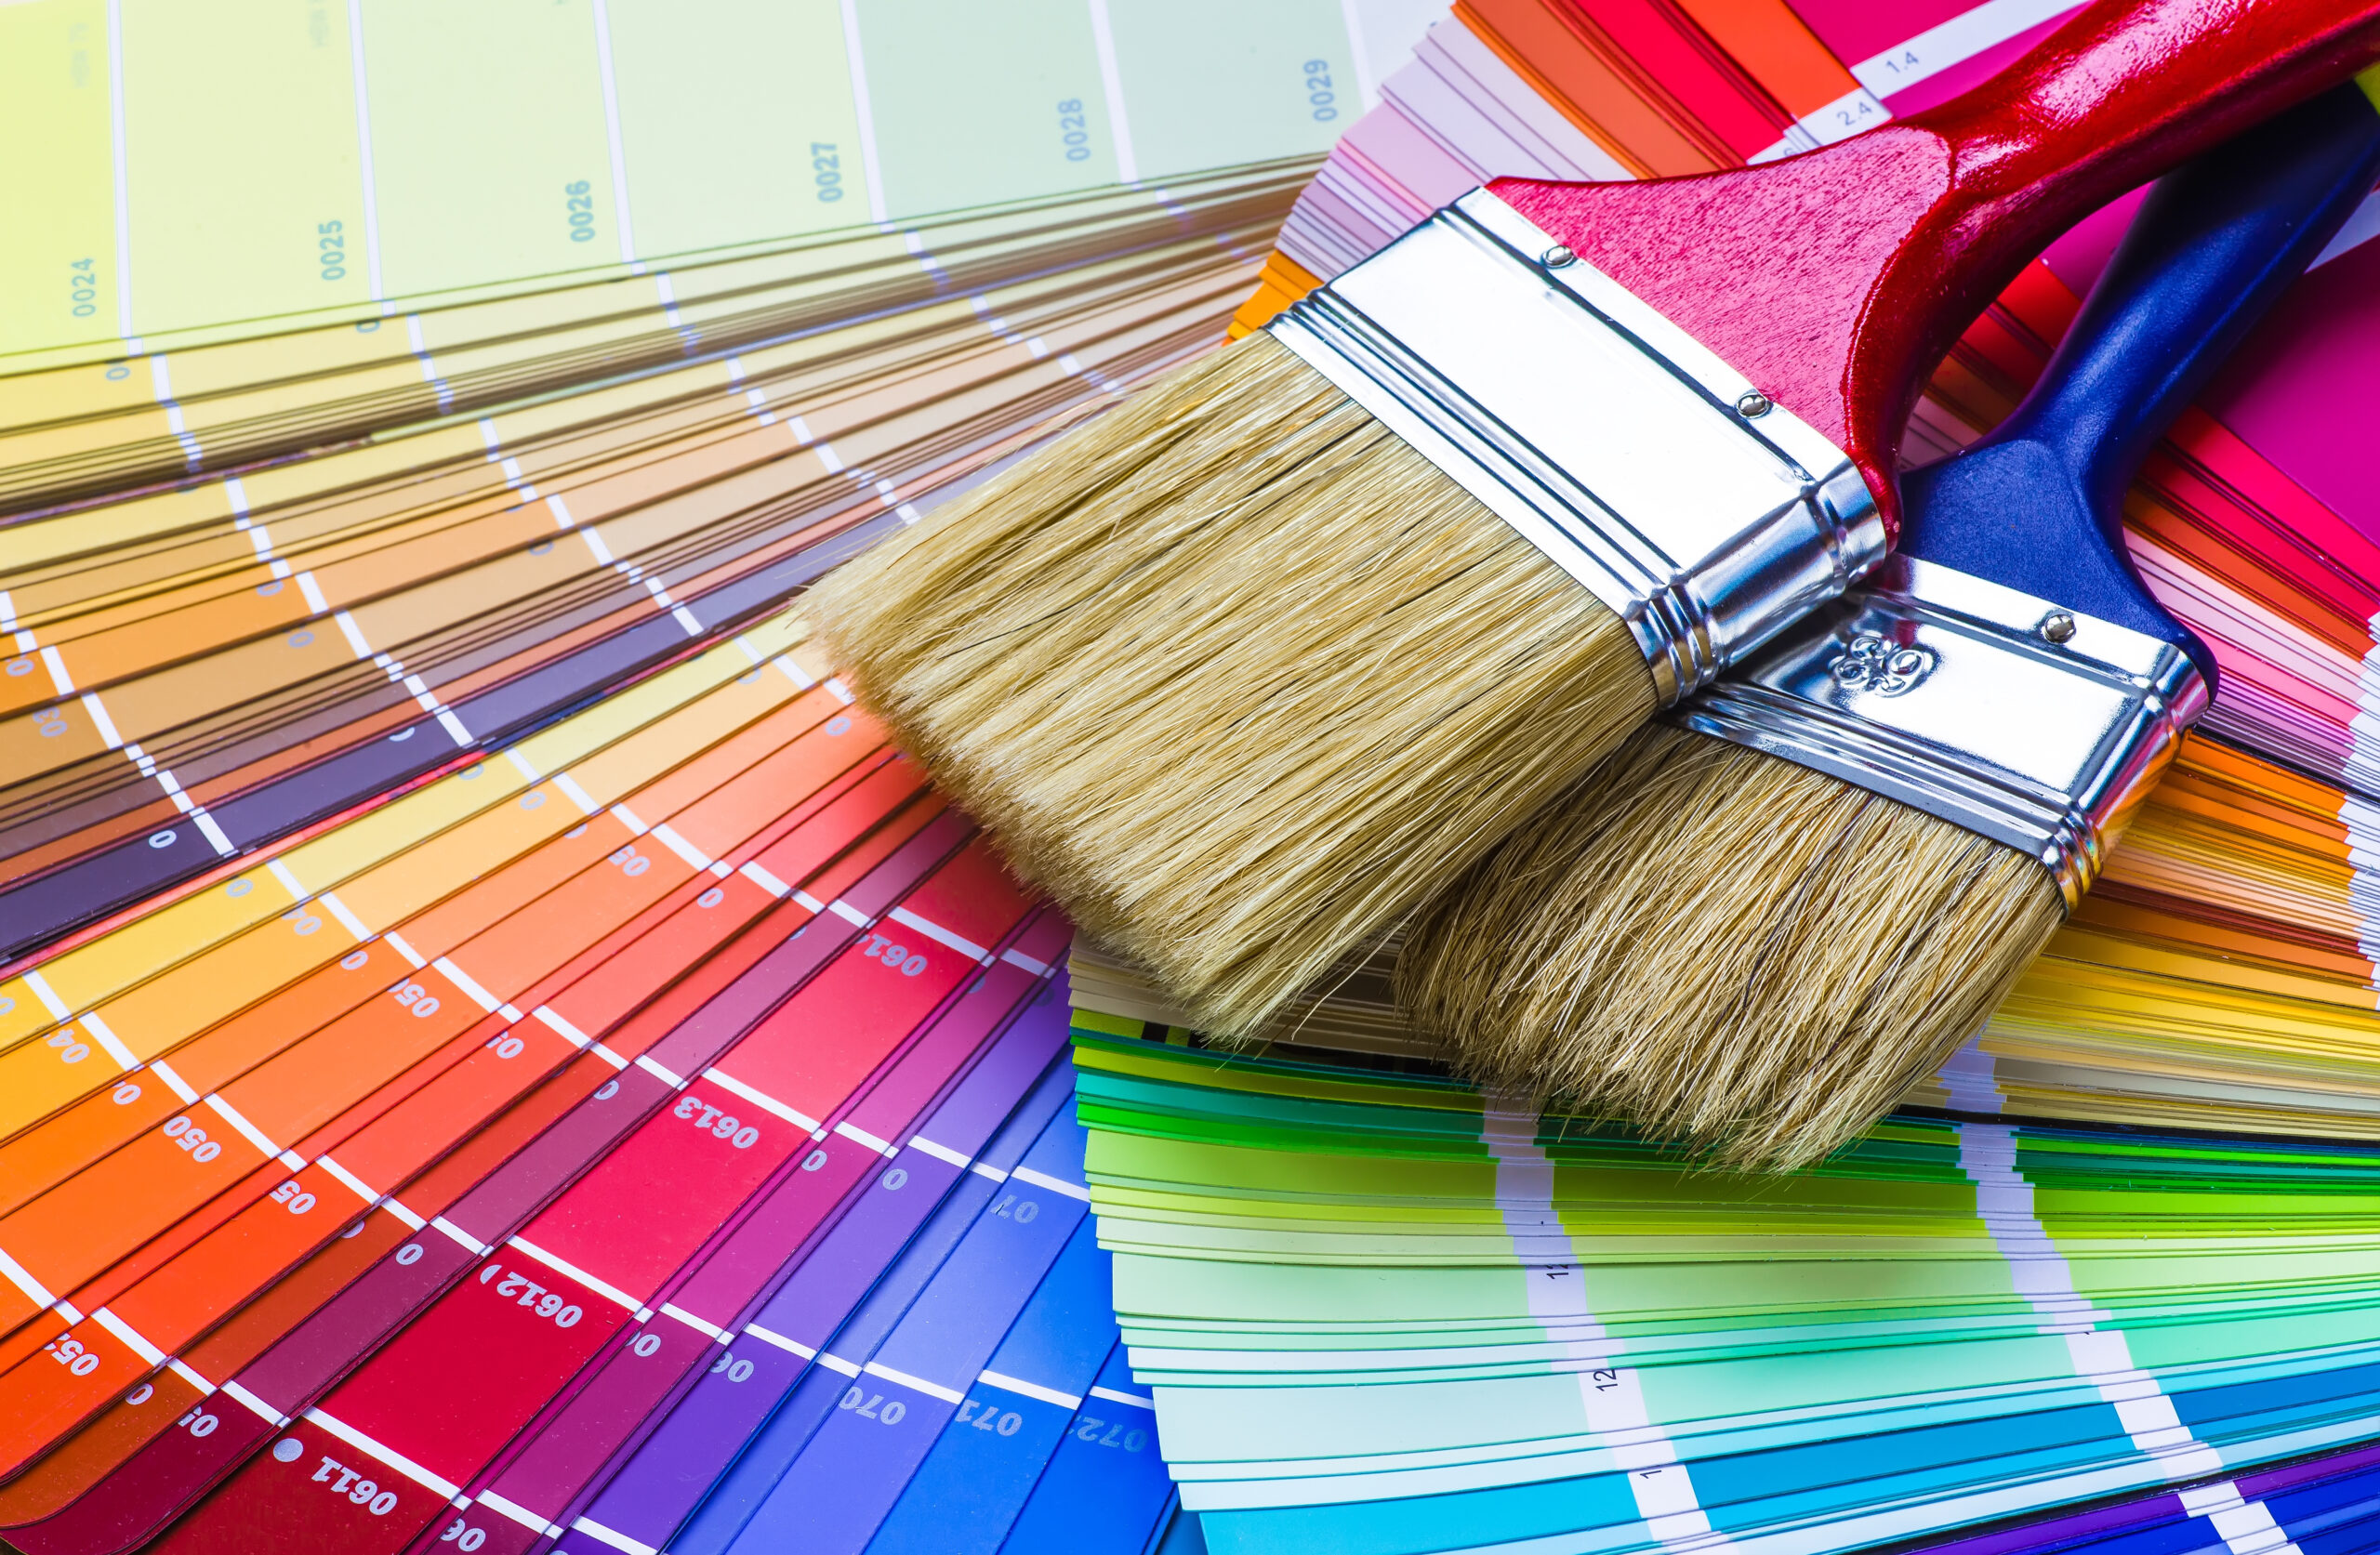 How To Choose the Best Paint Brush for Your Project